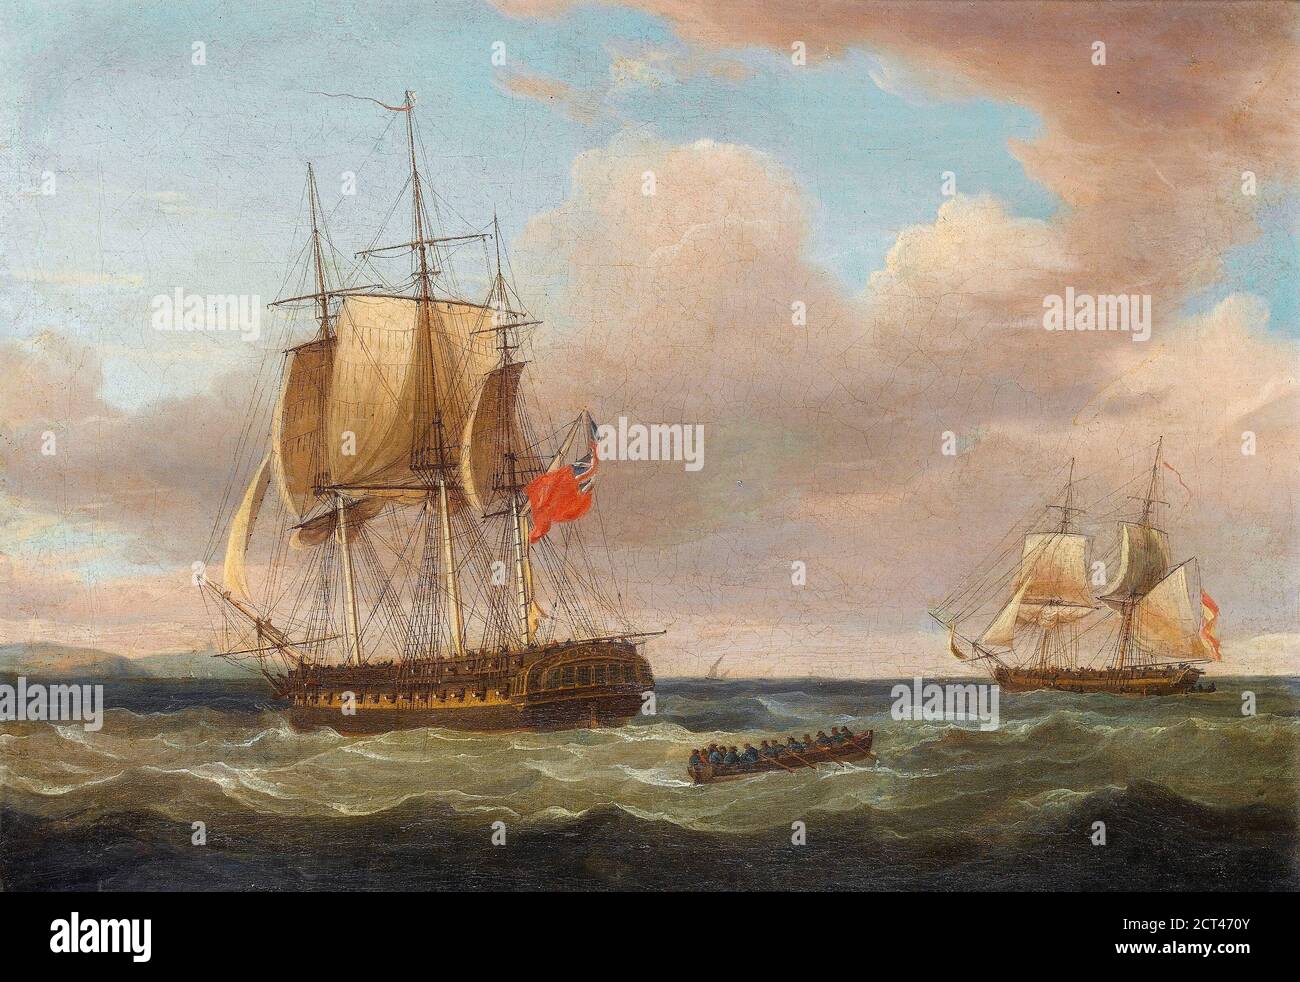 H.M.S. 'Pique', 40 guns, Captain C.H.B. Ross capturing the Spanish Brig 'Orquijo', 18 guns, 8th. February 1805. HMS. ‘Pique’, 36-guns, was built and launched as the French frigate ‘Pallas’ which was captured by a British squadron off the coast of France on 6th February 1800. Assimilated into the Royal Navy and renamed ‘Pique’, she rendered valuable service throughout the Napoleonic Wars and was finally scrapped in 1819. By Thomas Whitcombe (possibly 19 May 1763 – c. 1824) was a prominent British maritime painter of the Napoleonic Wars. Among his work are over 150 actions of the Royal Navy, and Stock Photo